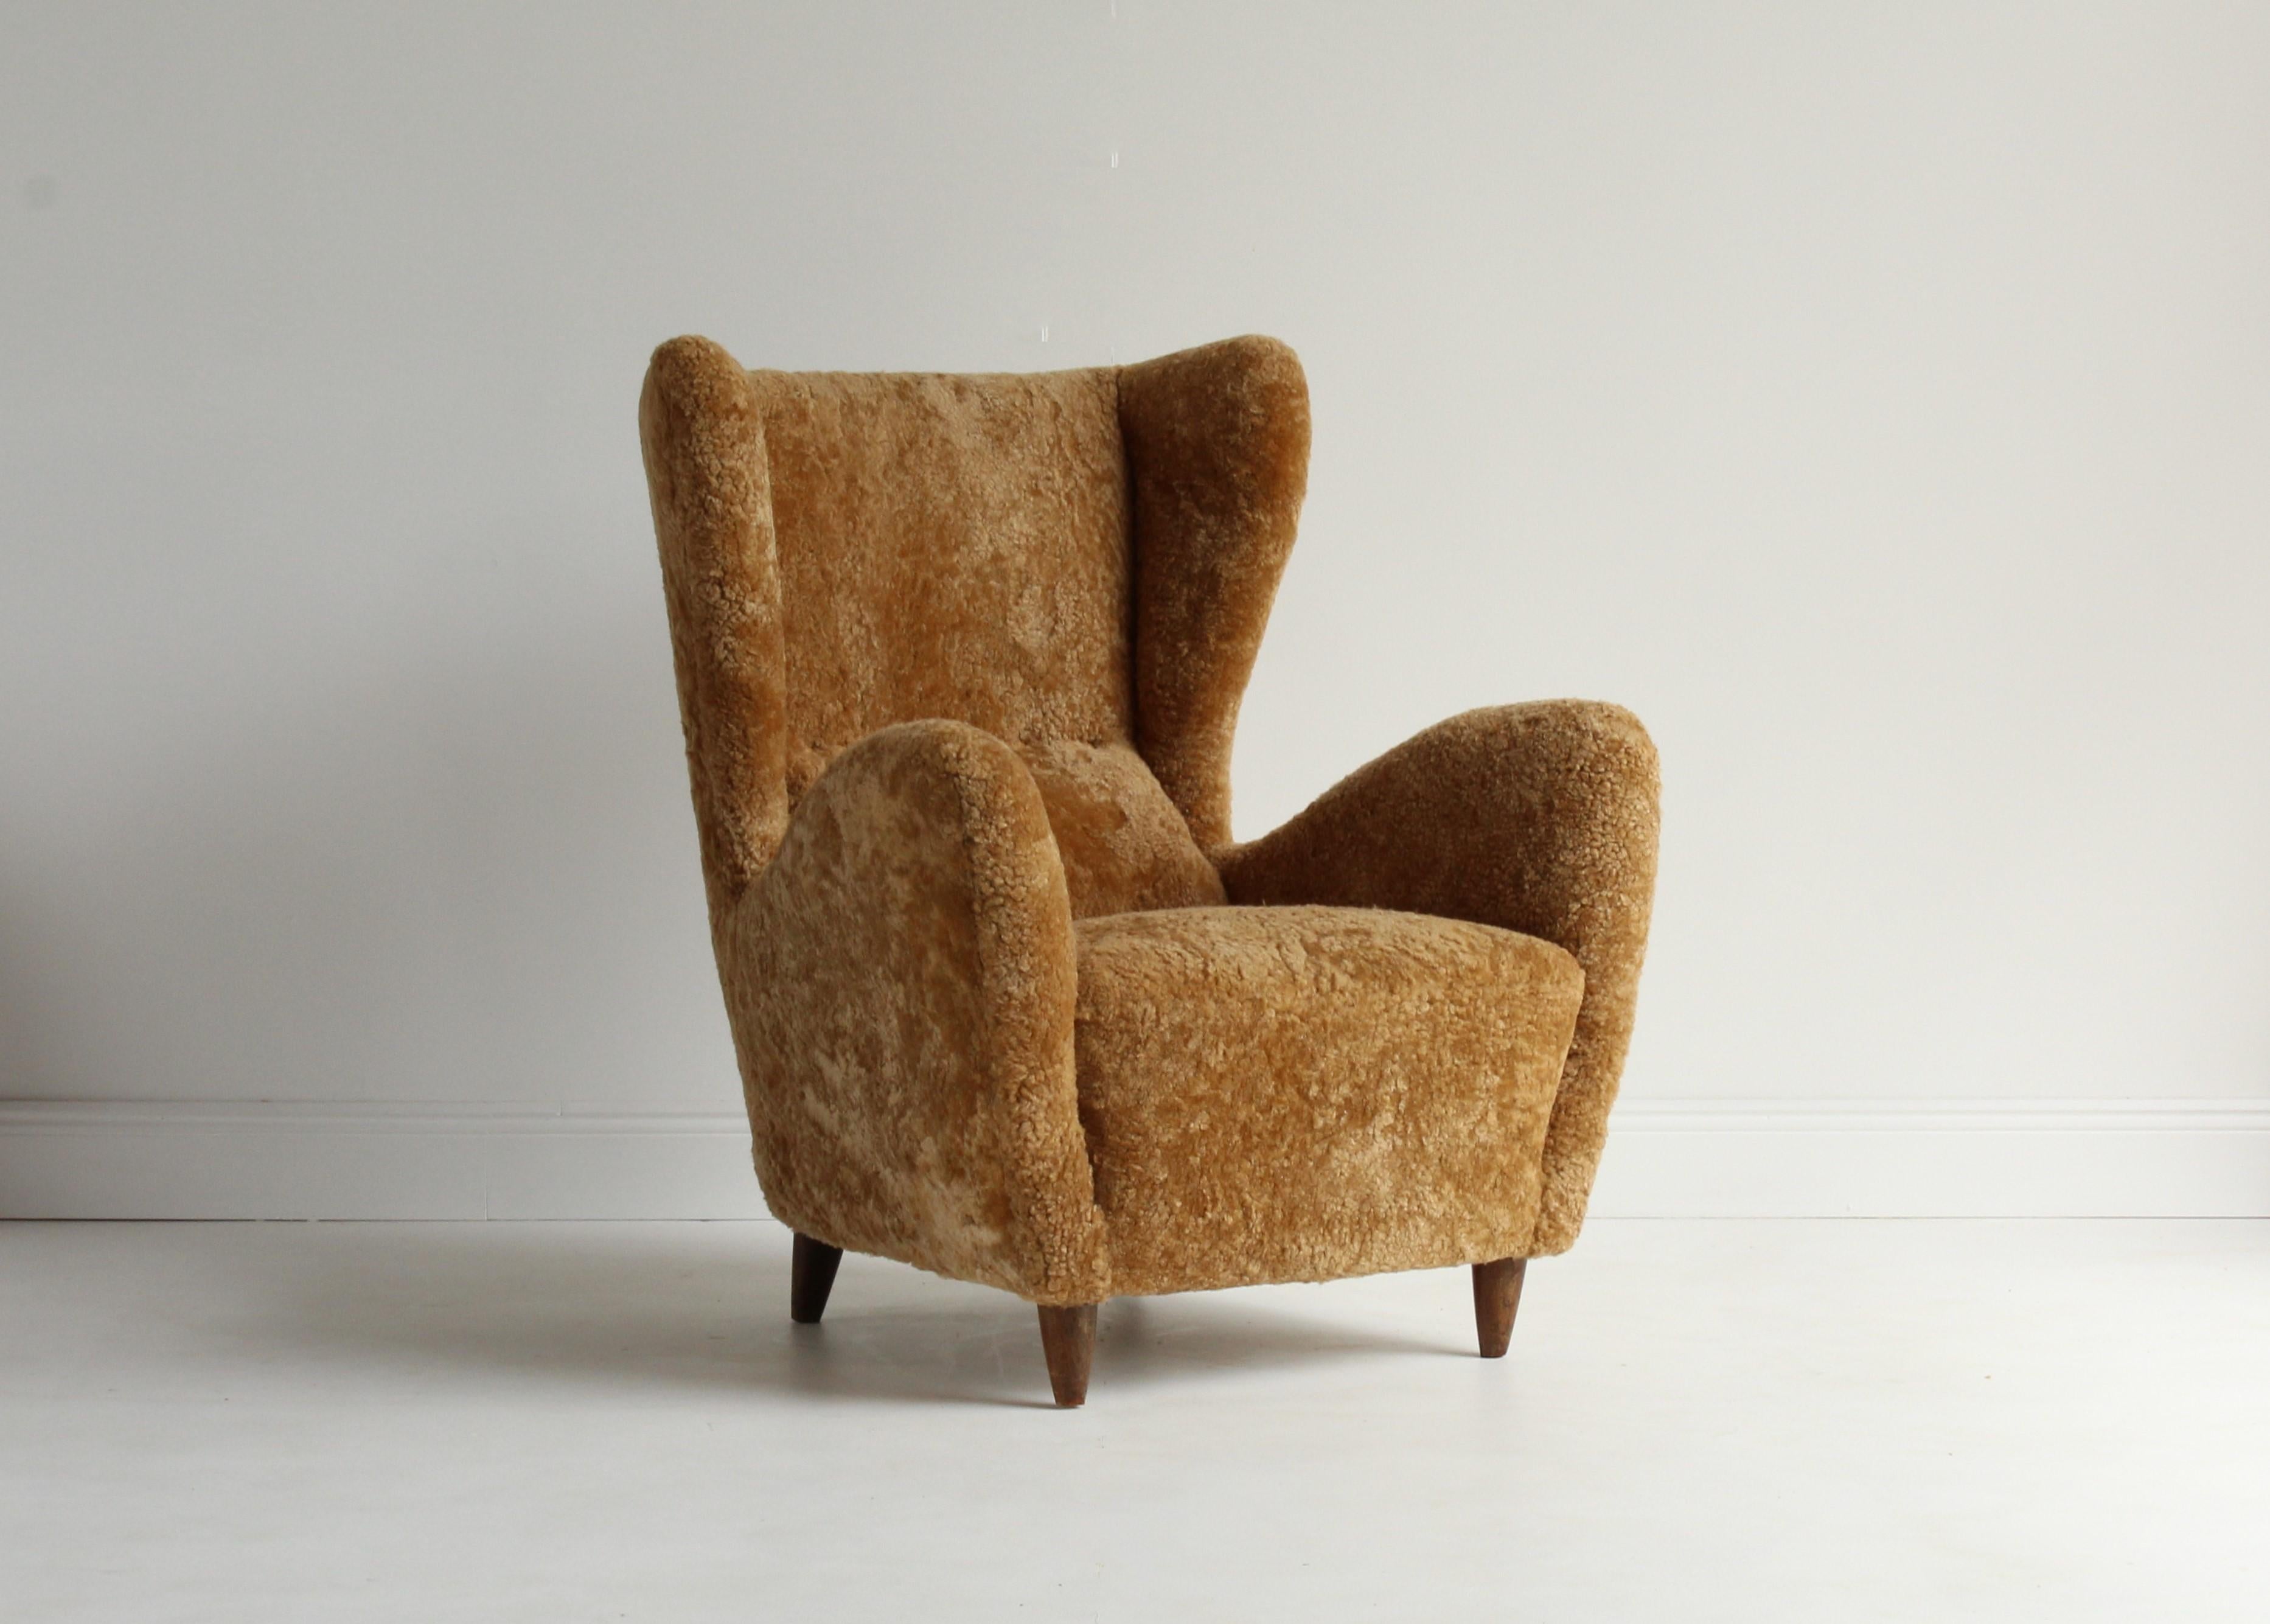 A rare organic modernist lounge / high back armchair. Designed by Gio Ponti. Legs in stained oak, newly reupholstered in lambskin. Sold with a certificate from Gio Ponti Archives. 

Other designers working in the organic style include Carlo